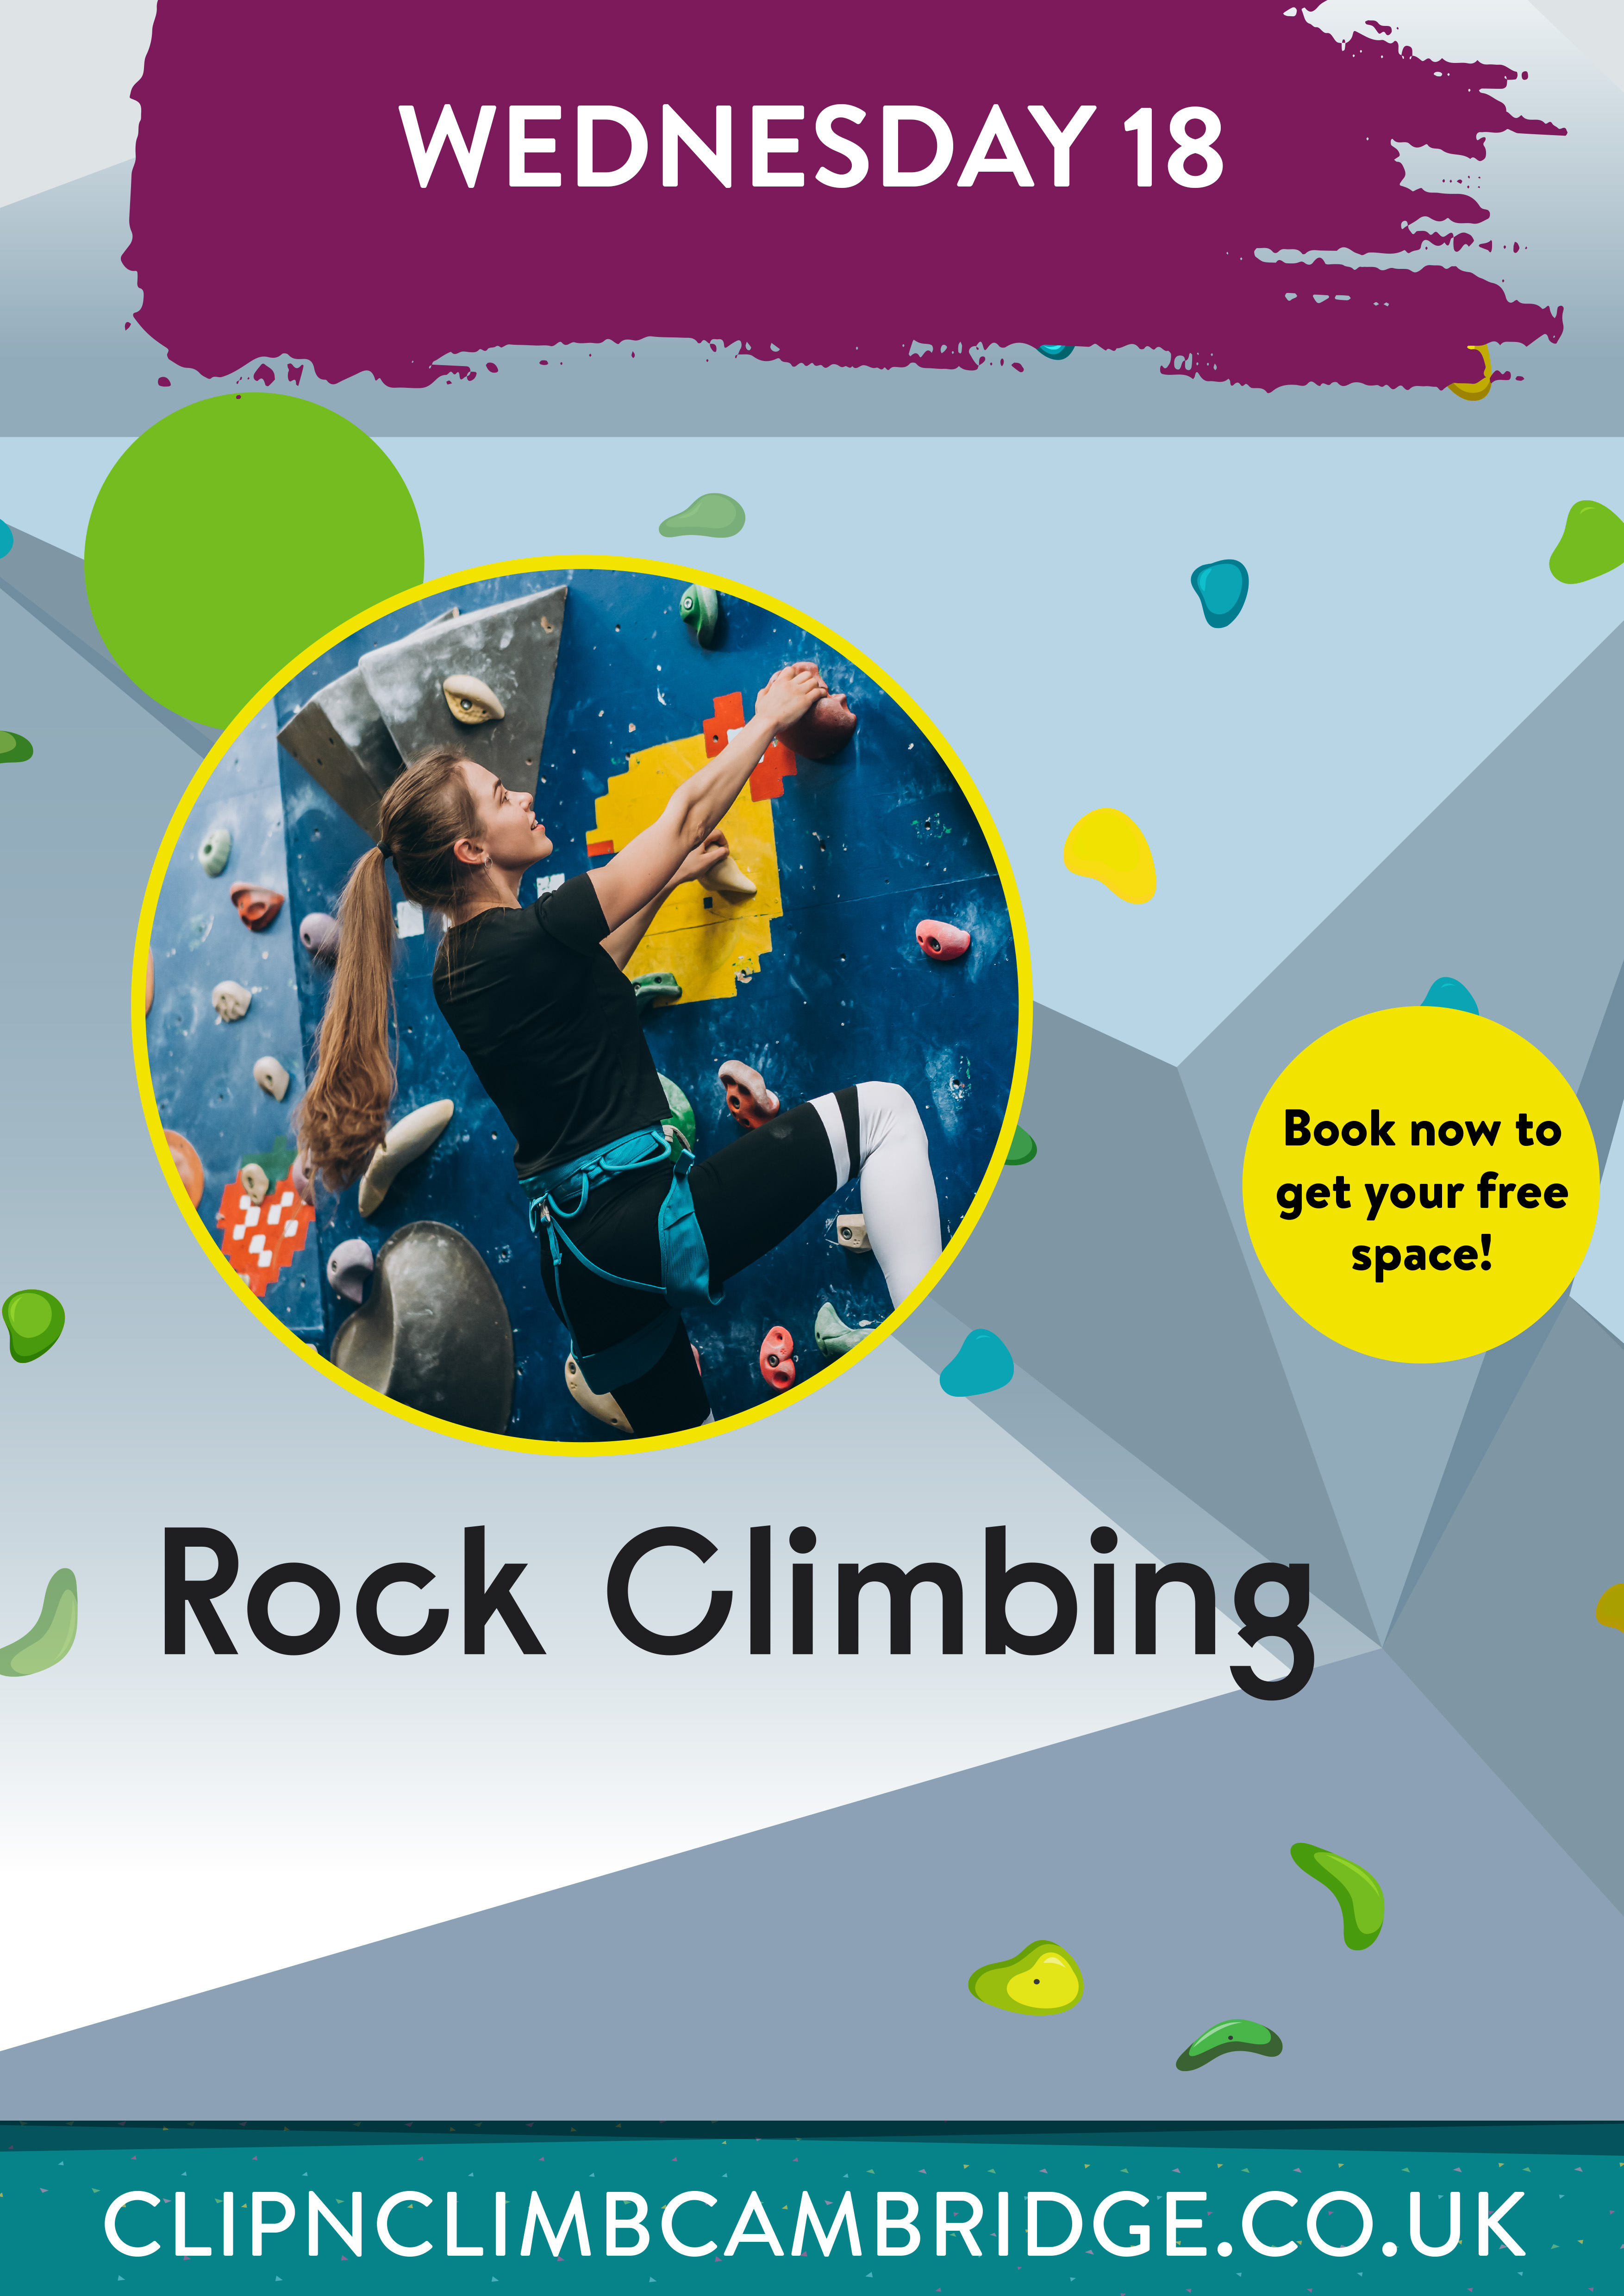 Wednesday 18 January. Rock Climbing. Book now to get your free space.